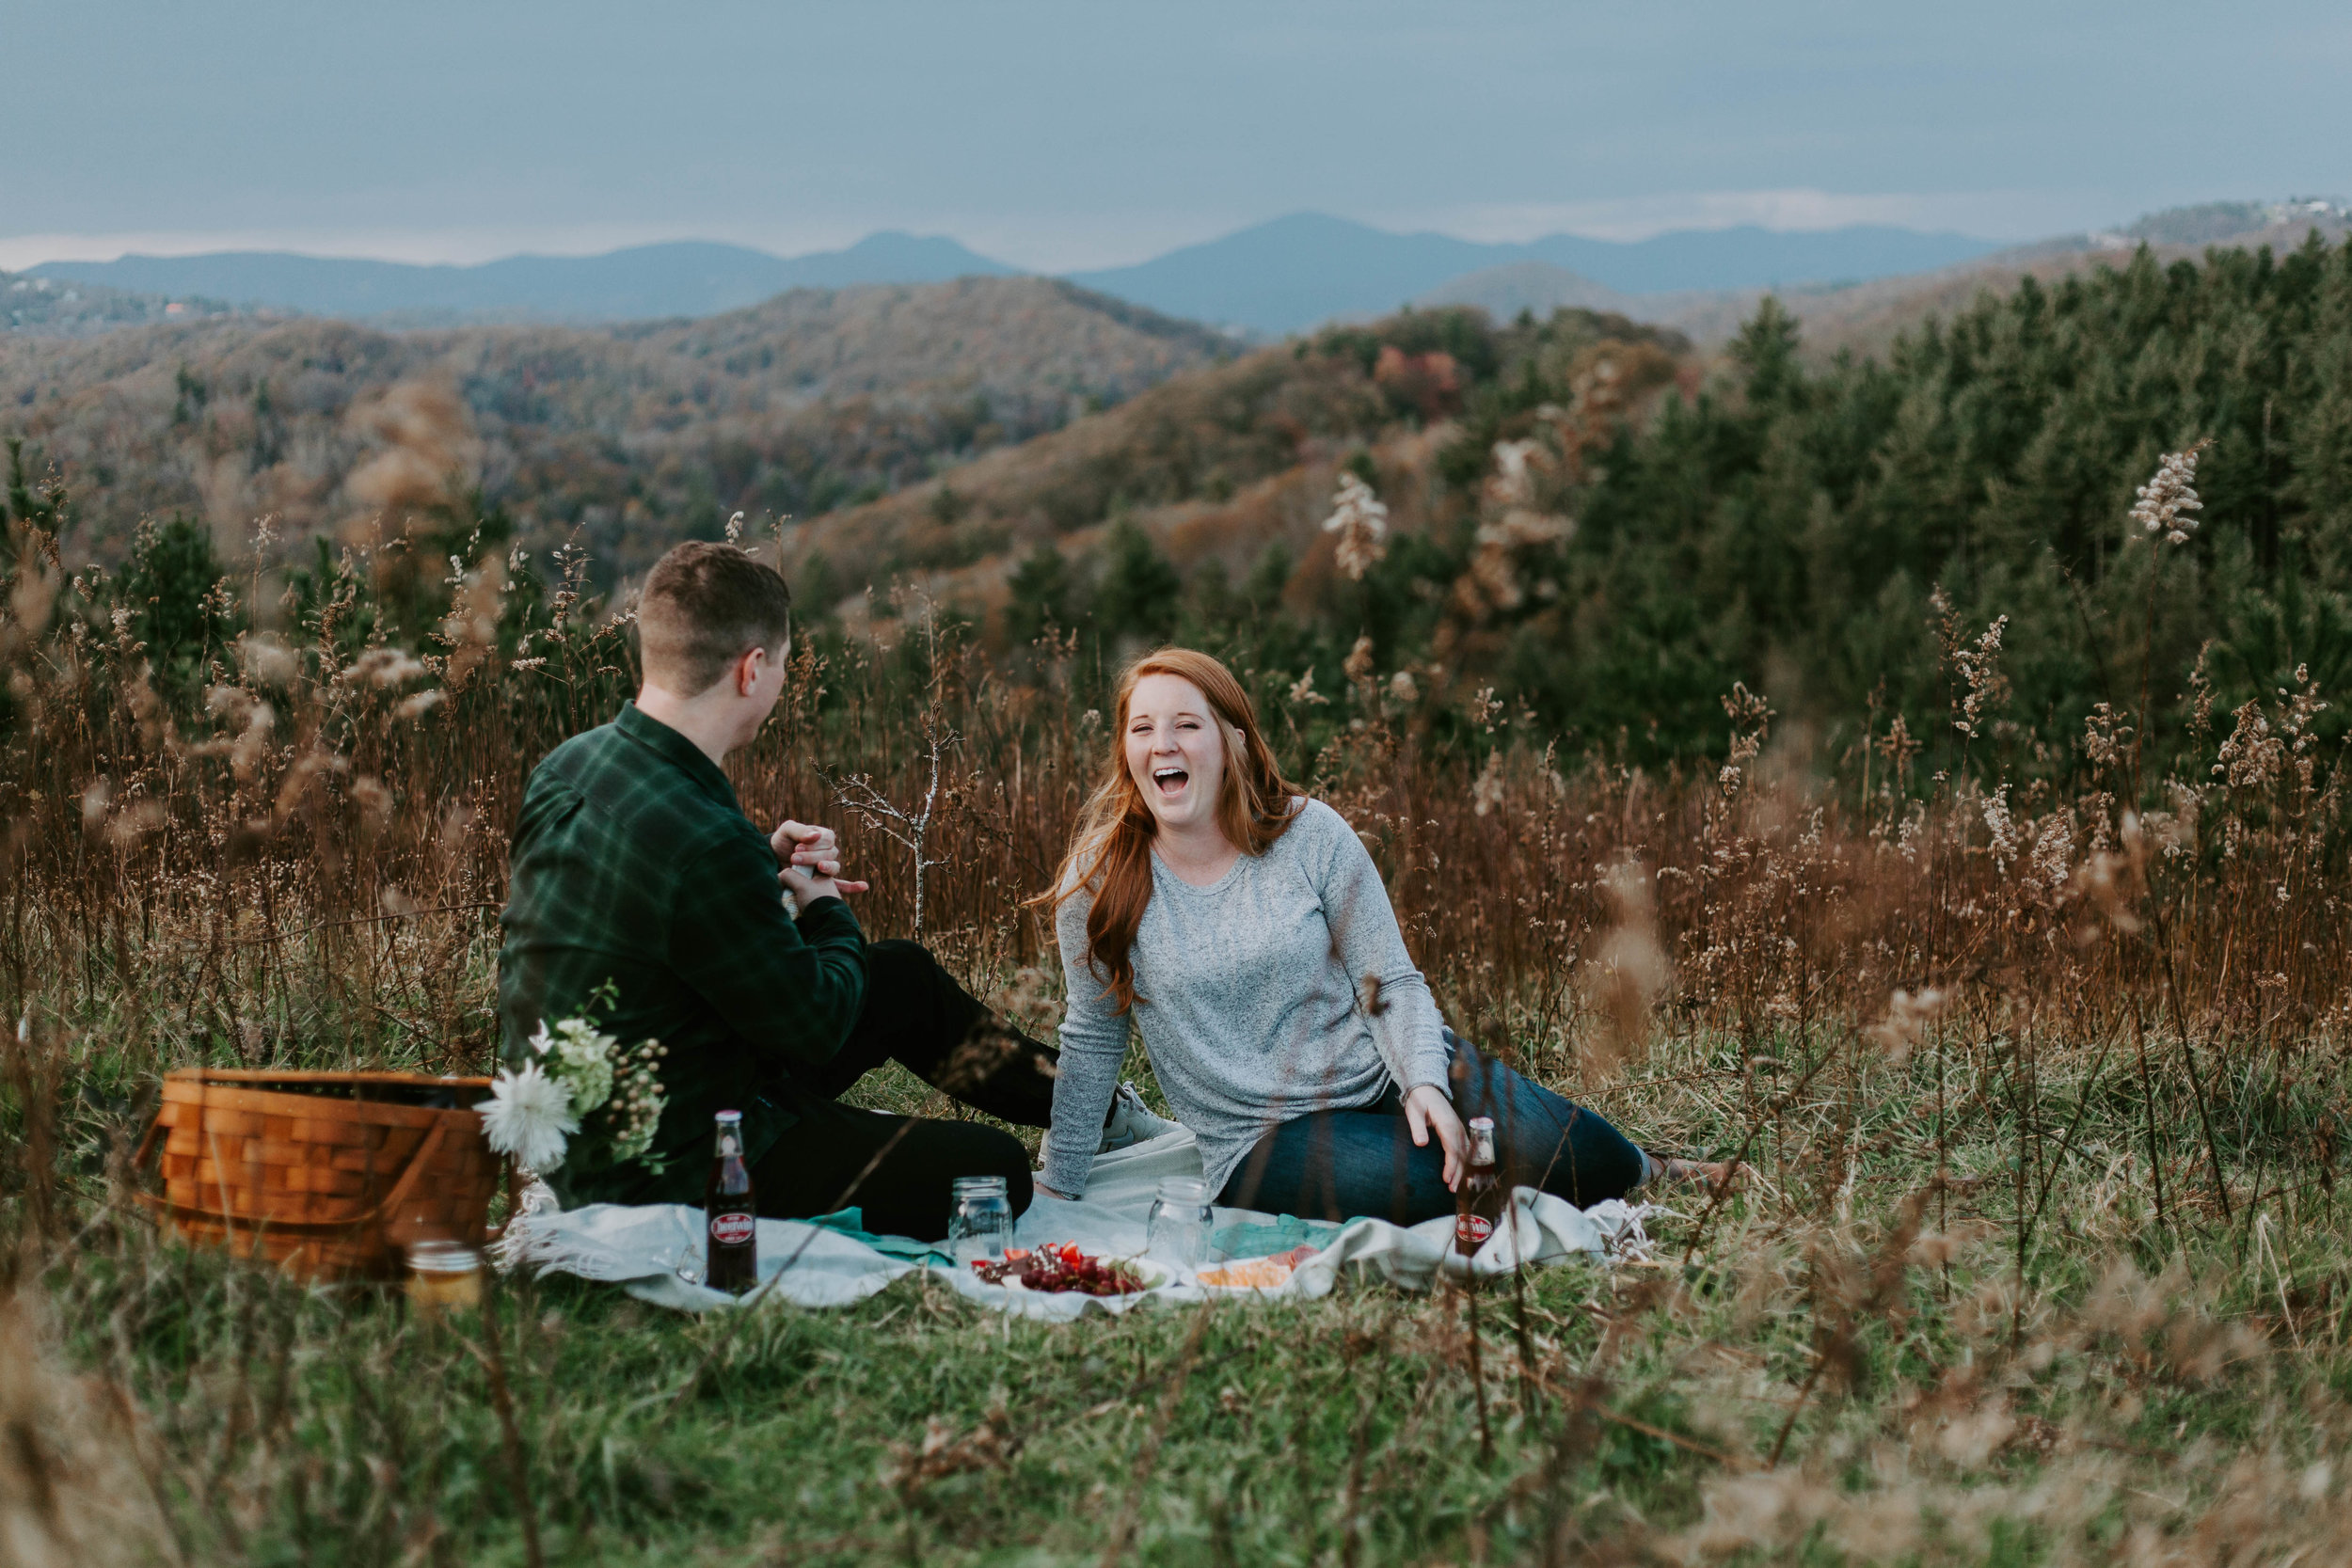 Mountain_Top_Picnic_Engagement_Session_012.jpg